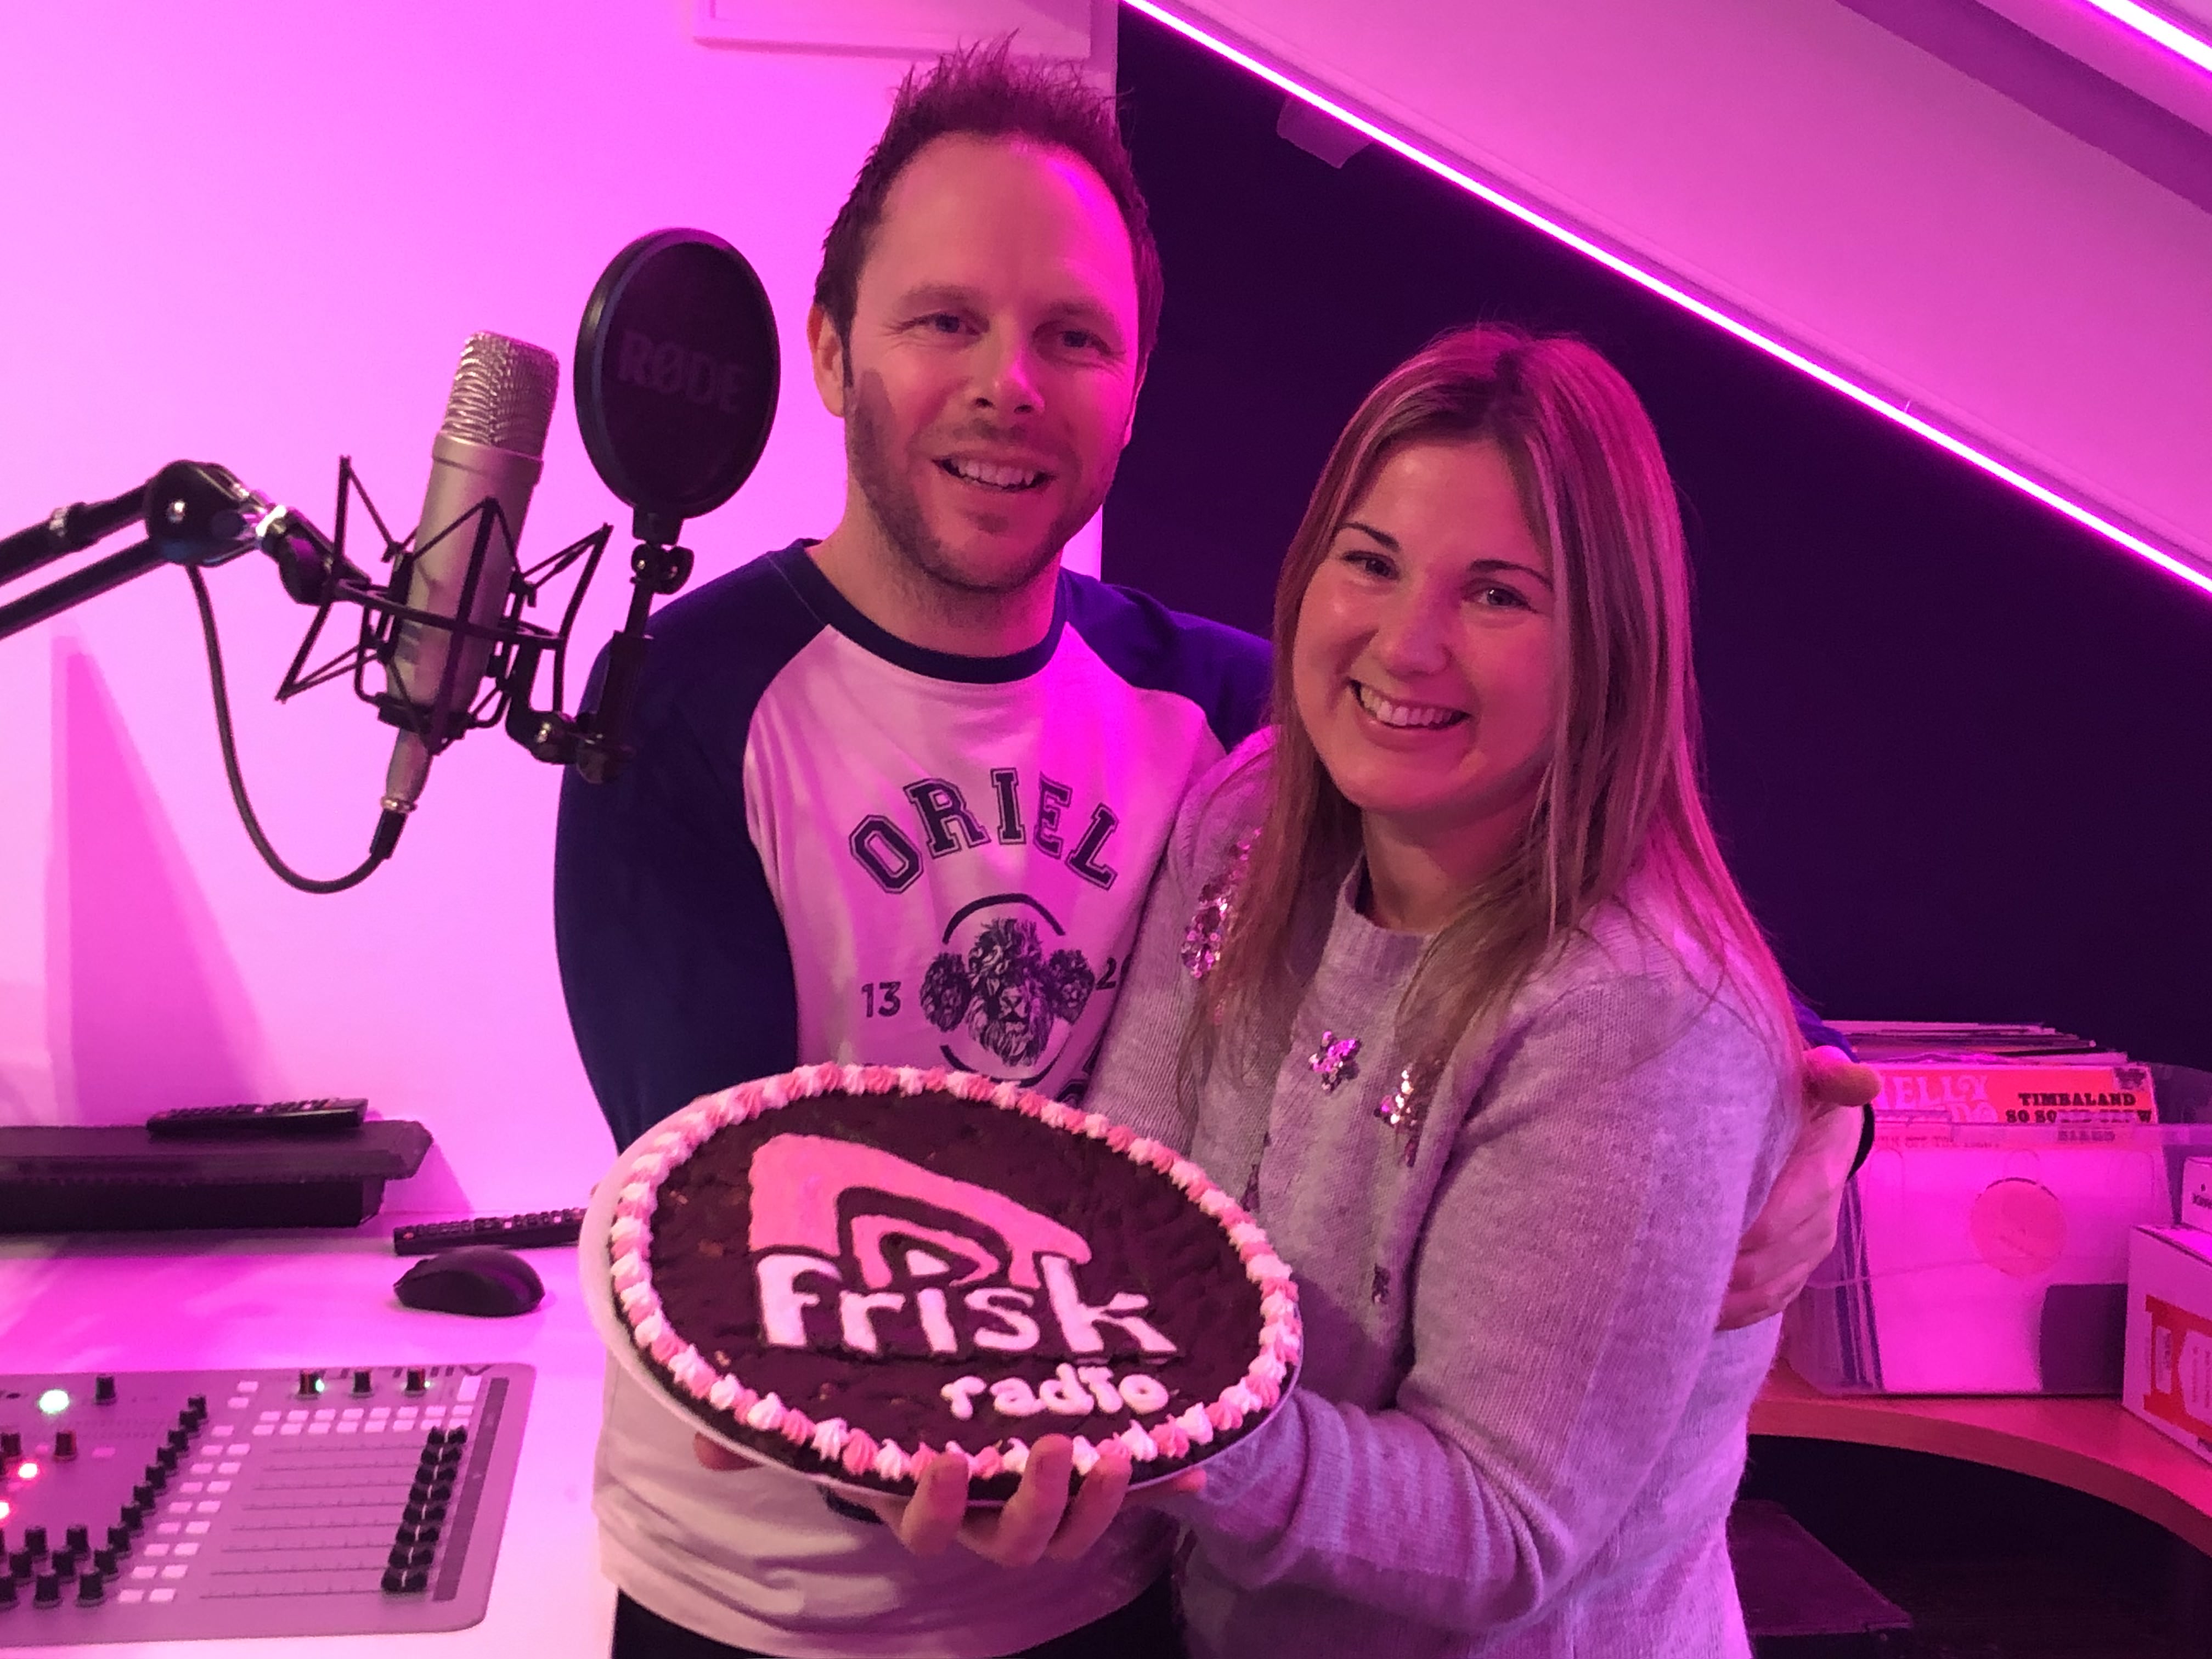 Frisk Radio Celebrates First Year of Broadcasting at Frisk Radio - The Rhythm of The North East